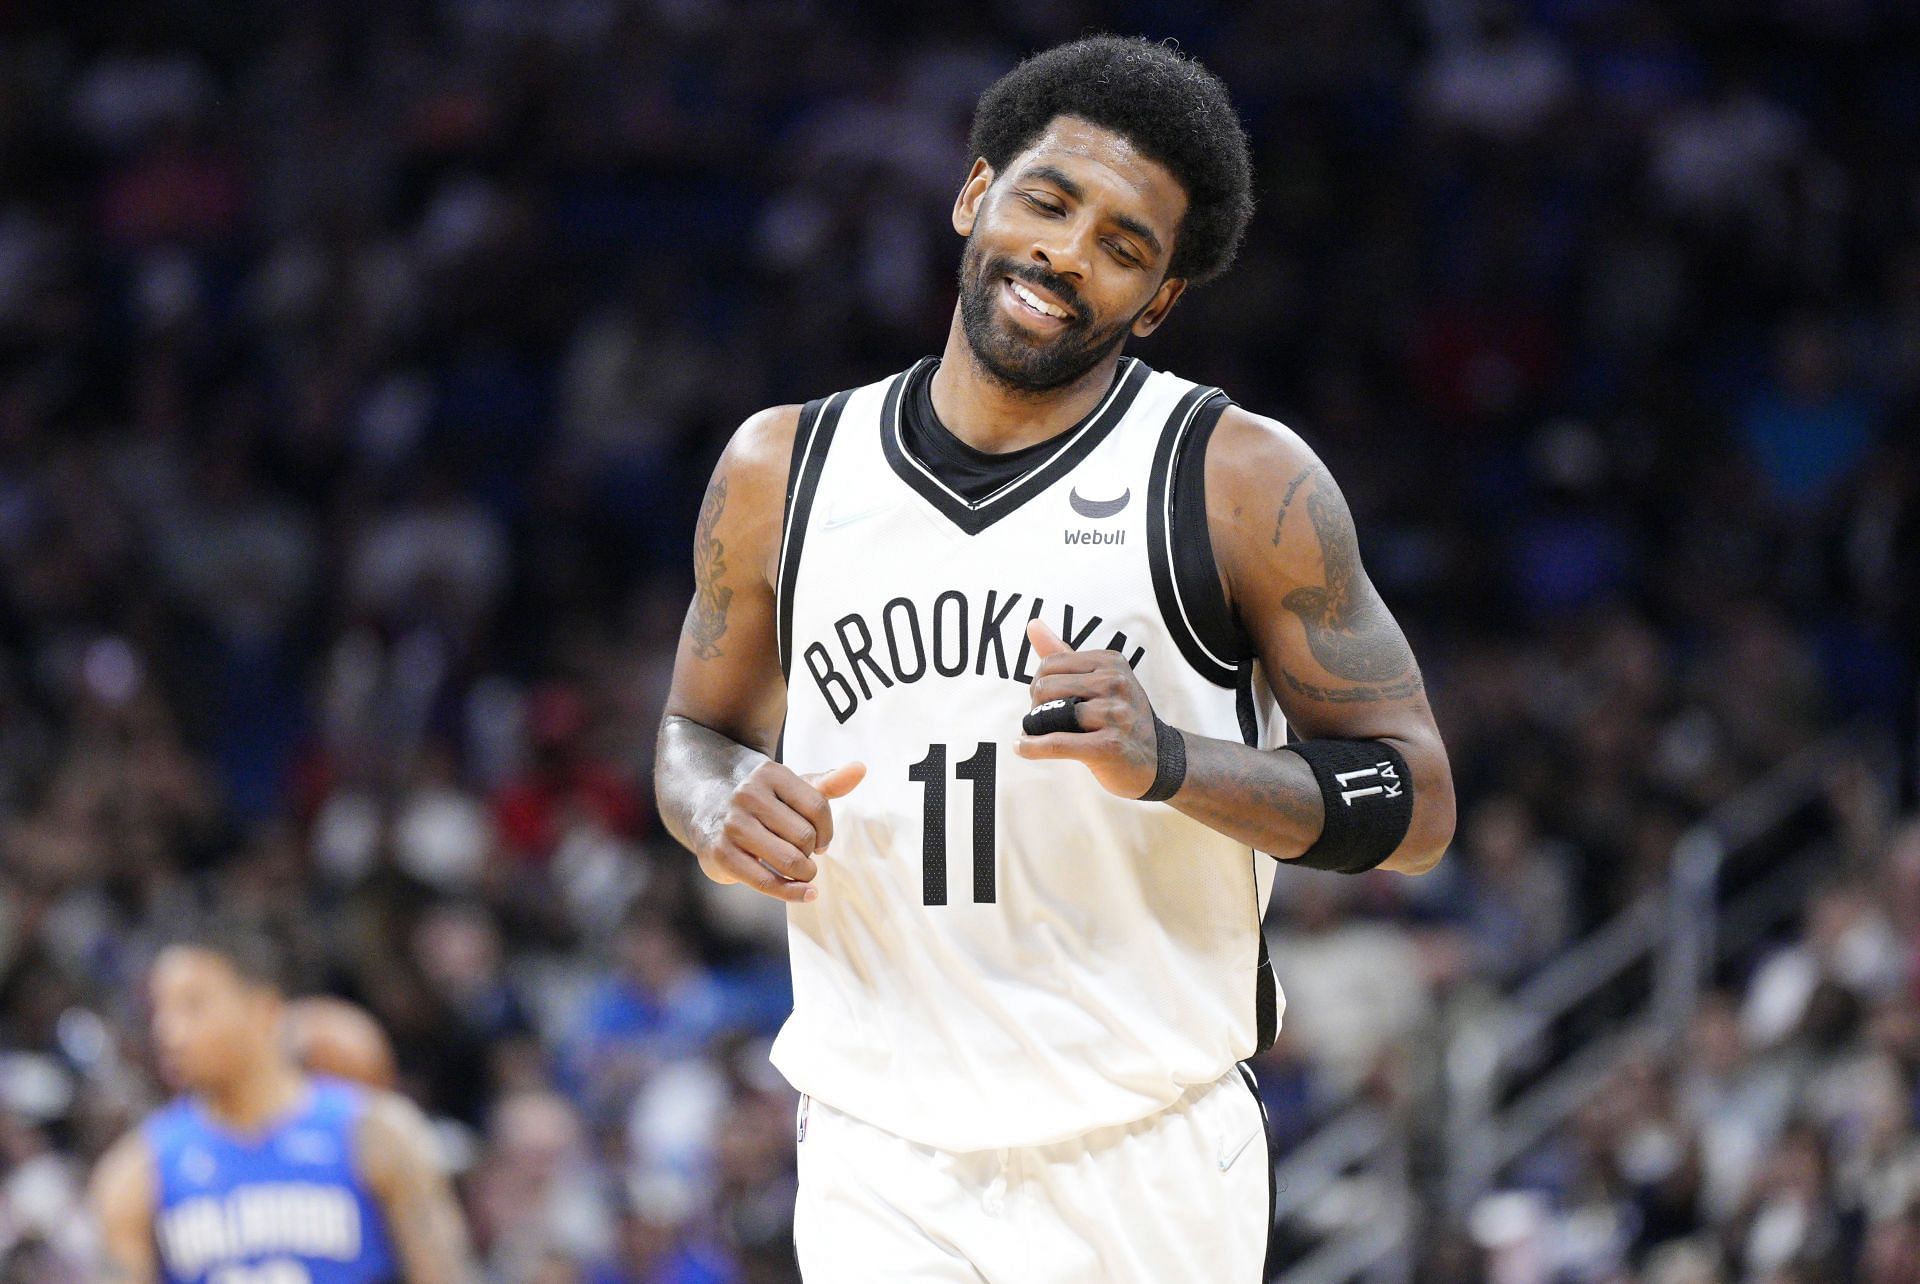 Kyrie Irving #11 of the Brooklyn Nets.